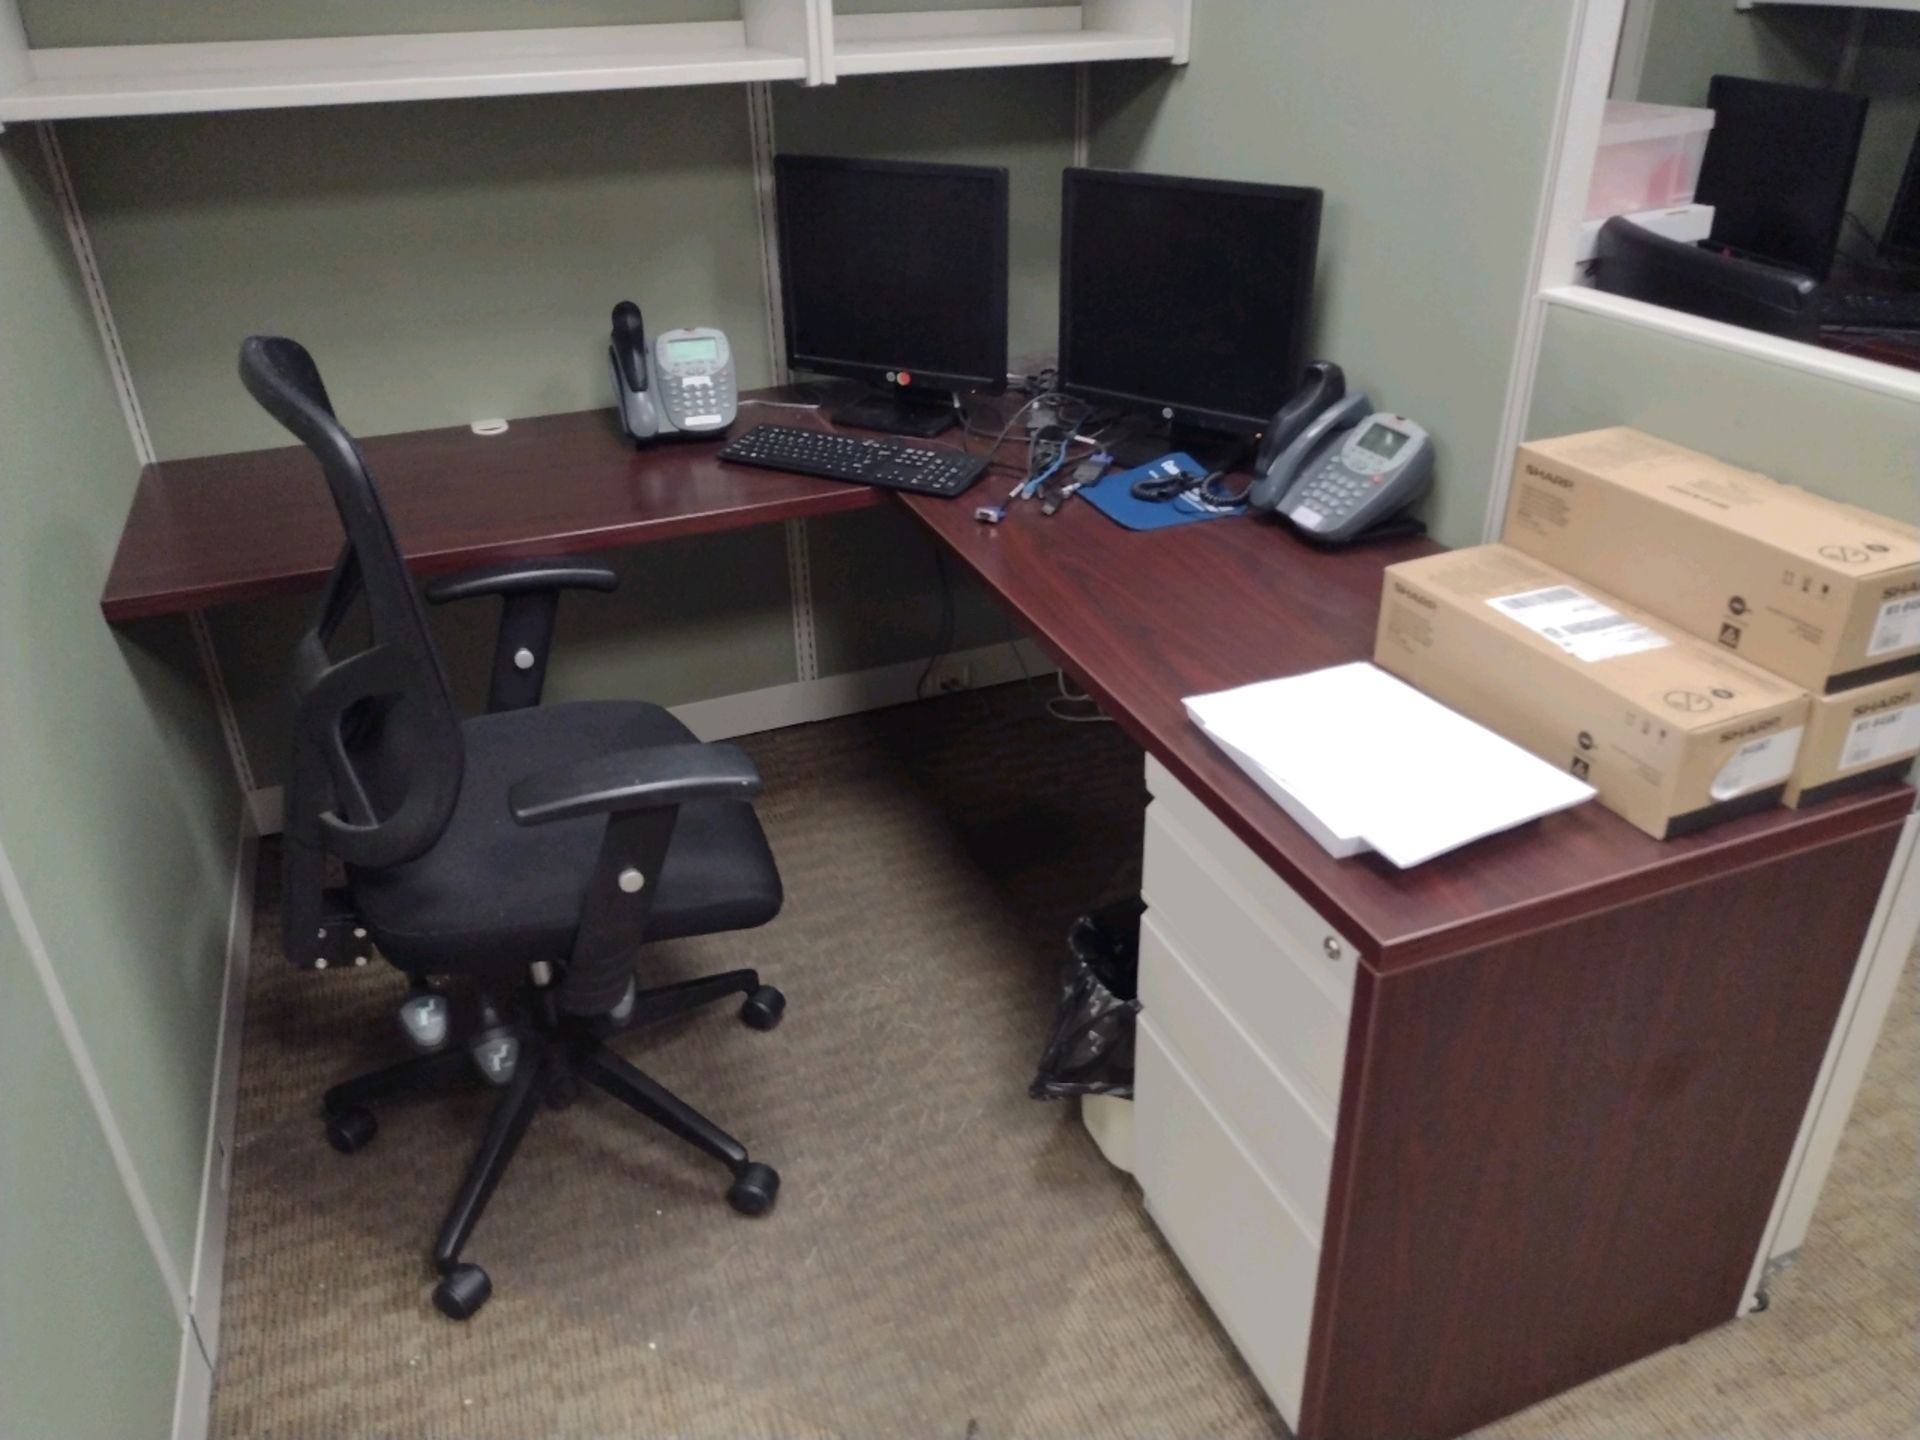 OFFICE SUITE TO INCLUDE: 8 WORK STATION MODULAR CUBICLE SYSTEM WITH CHAIRS, PRINTERS, MONITORS, - Image 10 of 16